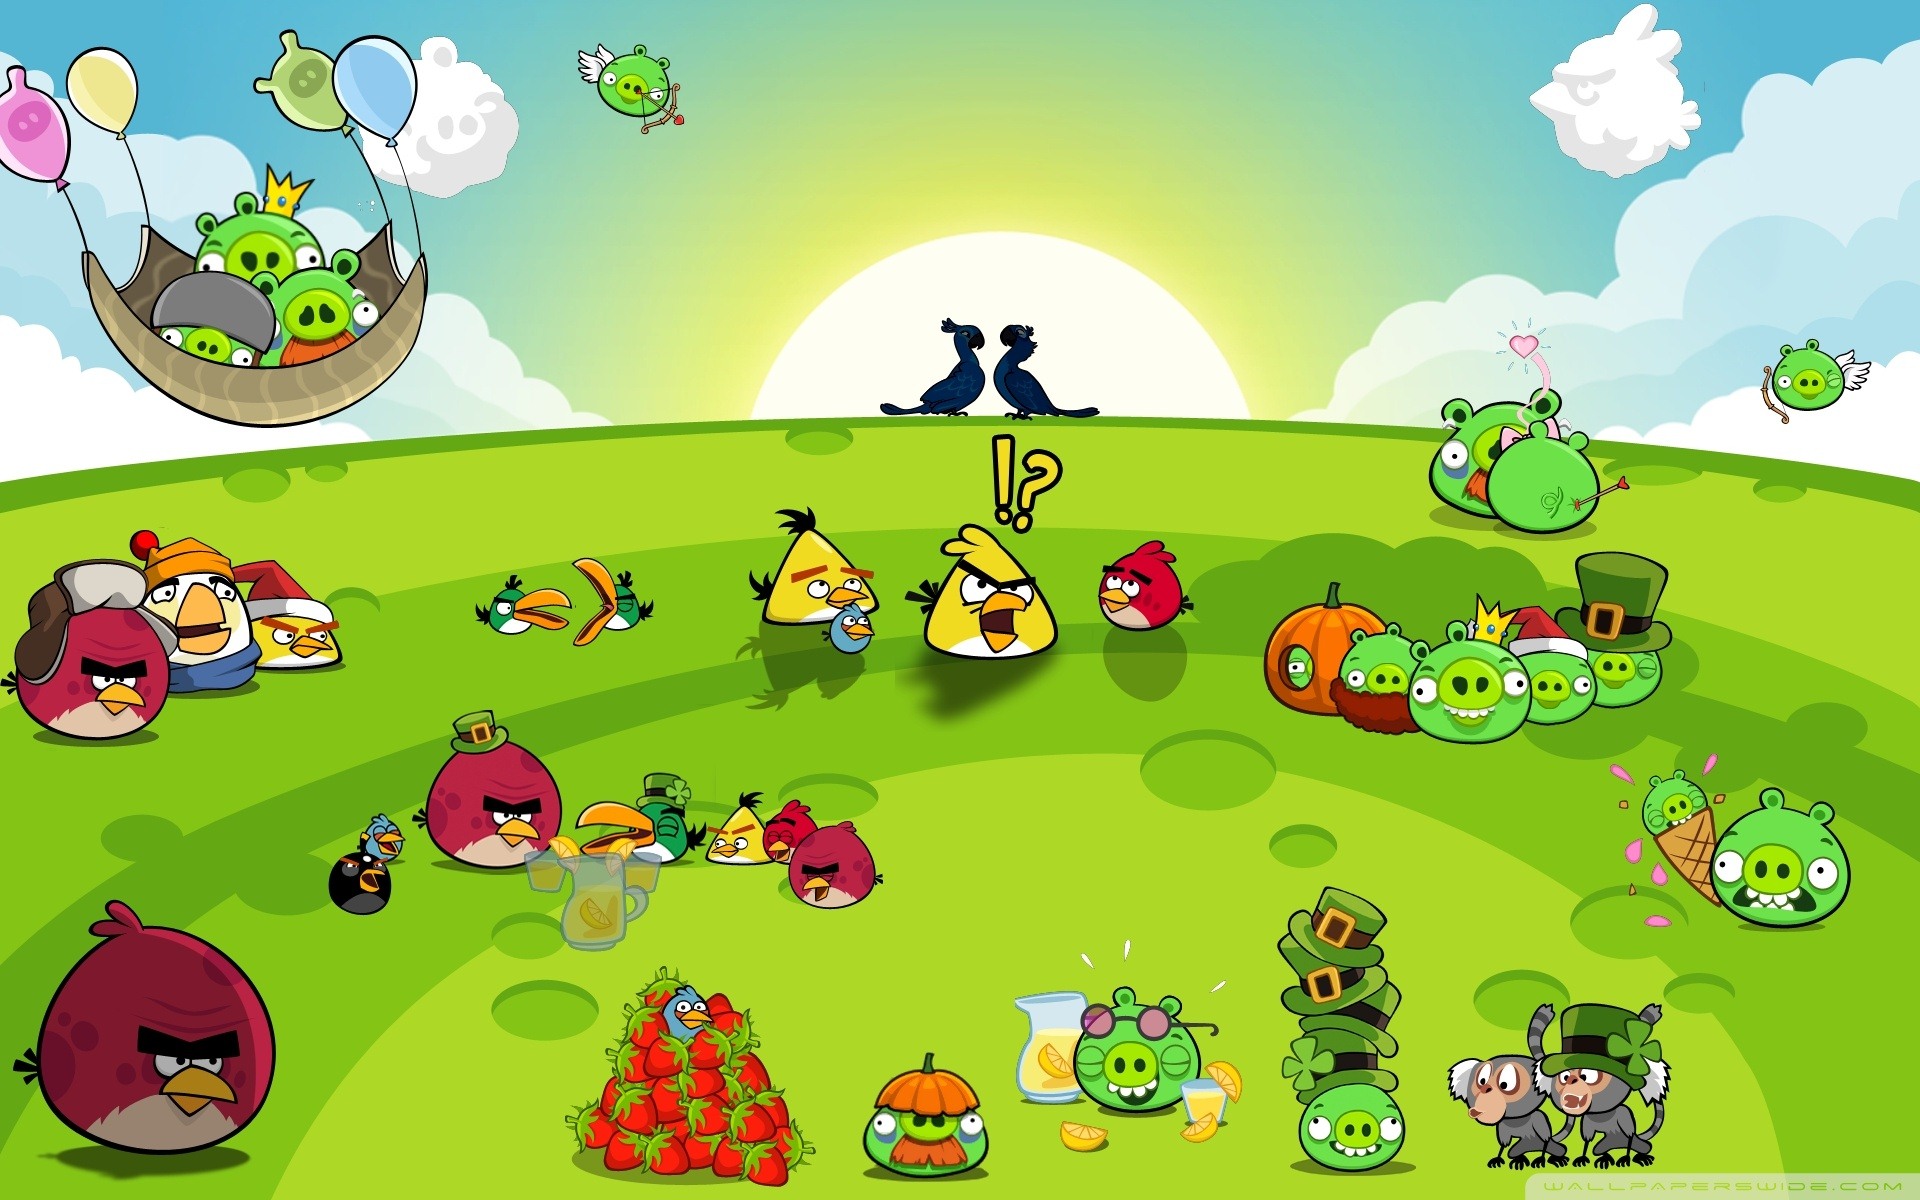 Angry Birds Game Wallpapers #11 - 1920x1200